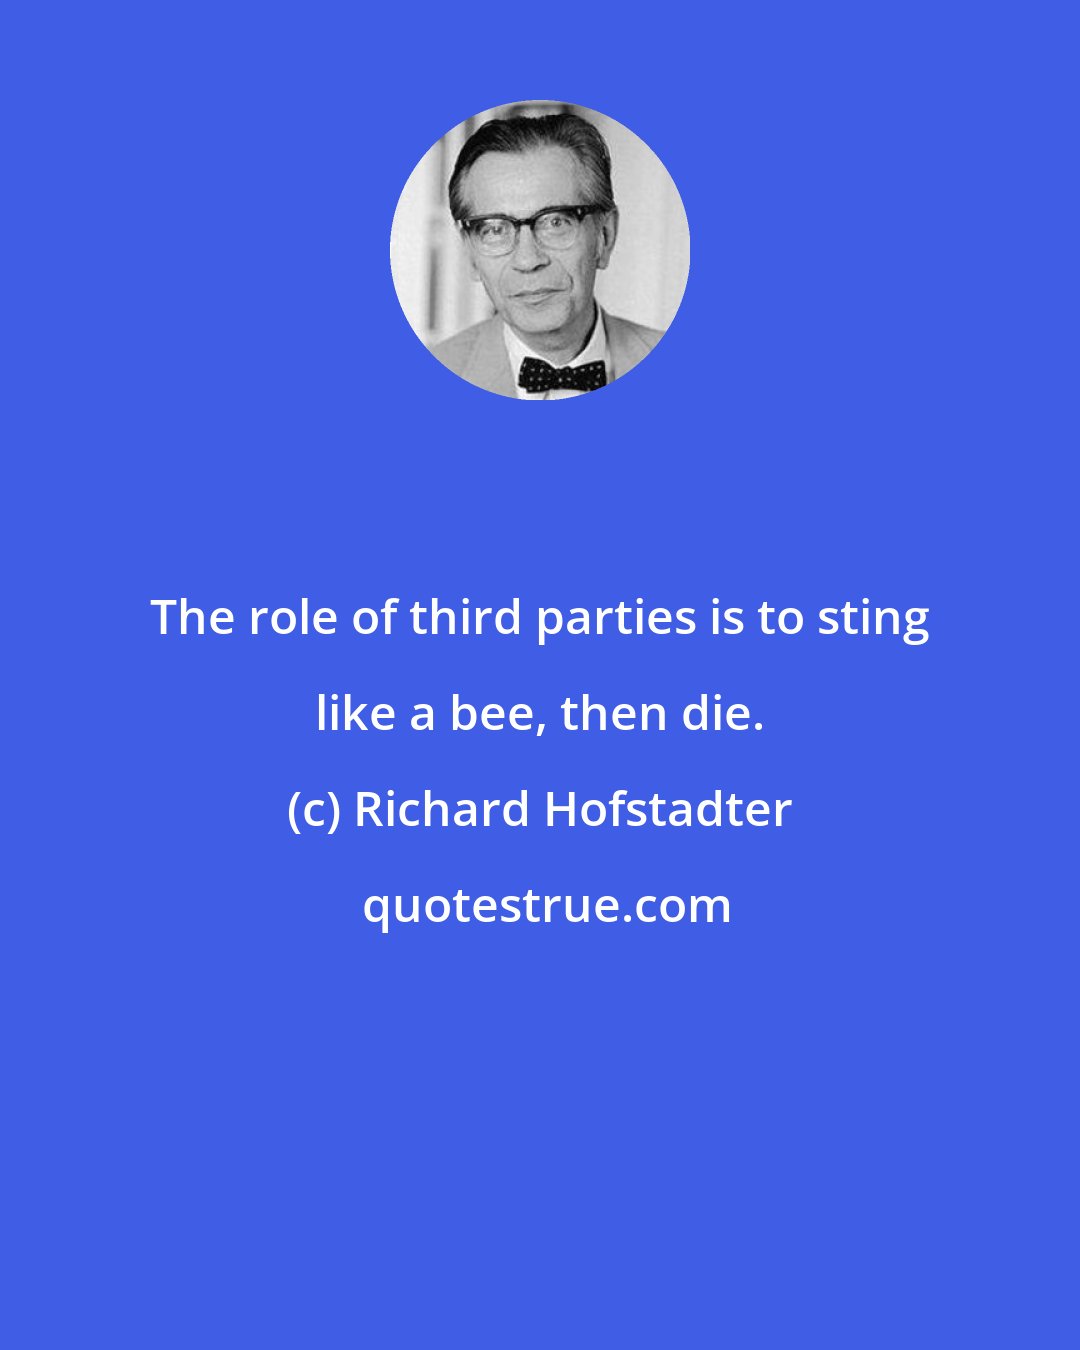 Richard Hofstadter: The role of third parties is to sting like a bee, then die.